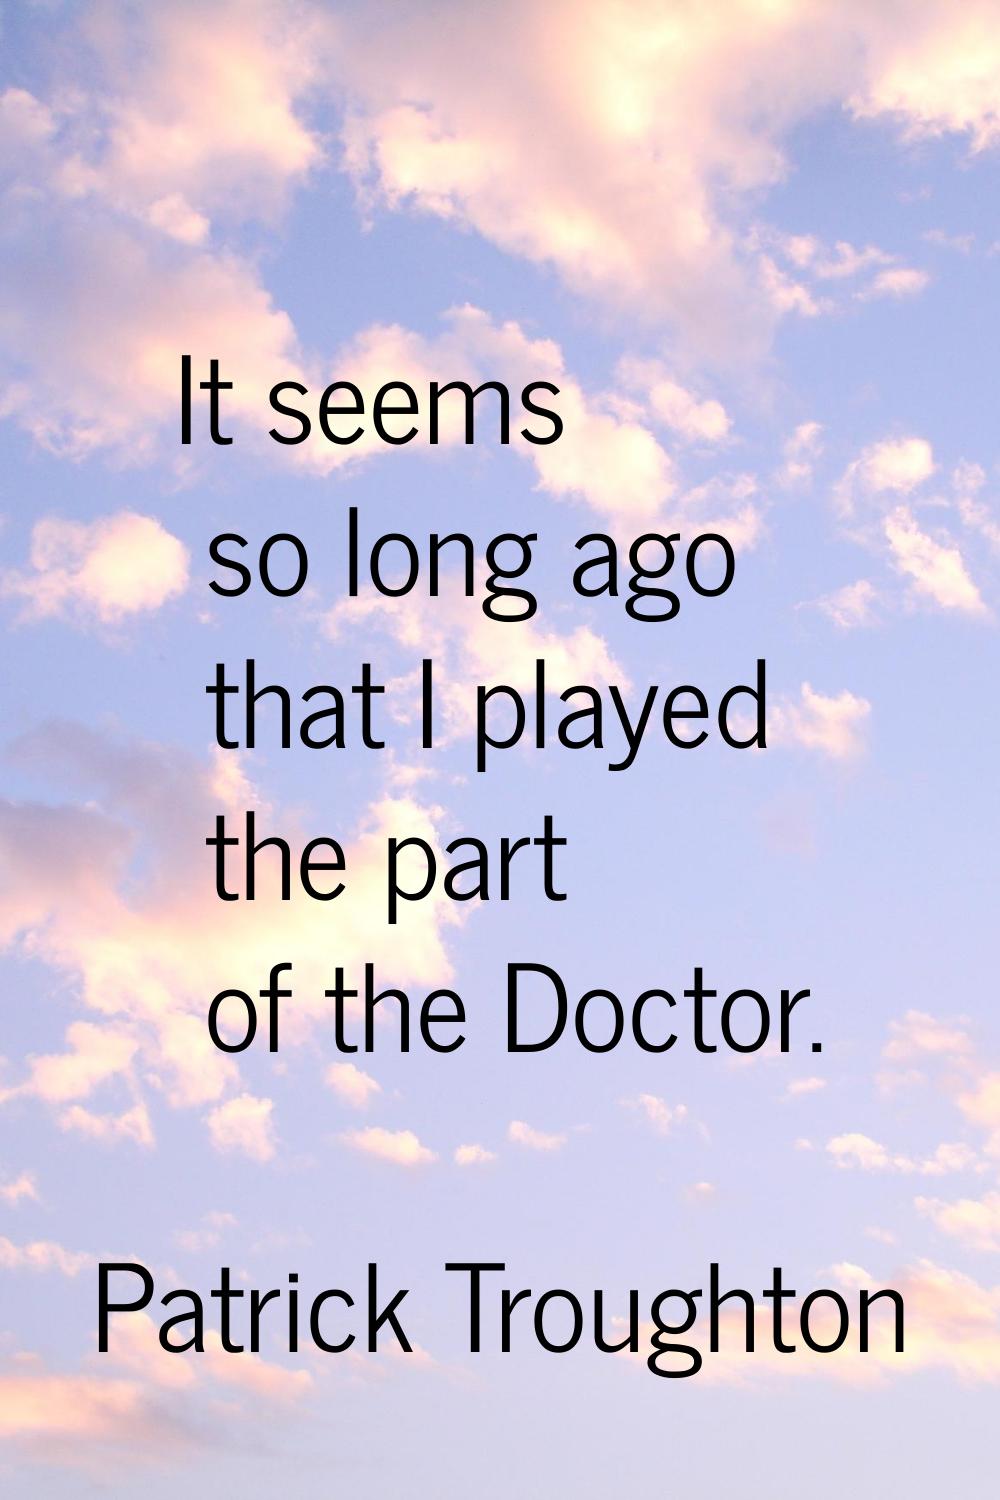 It seems so long ago that I played the part of the Doctor.